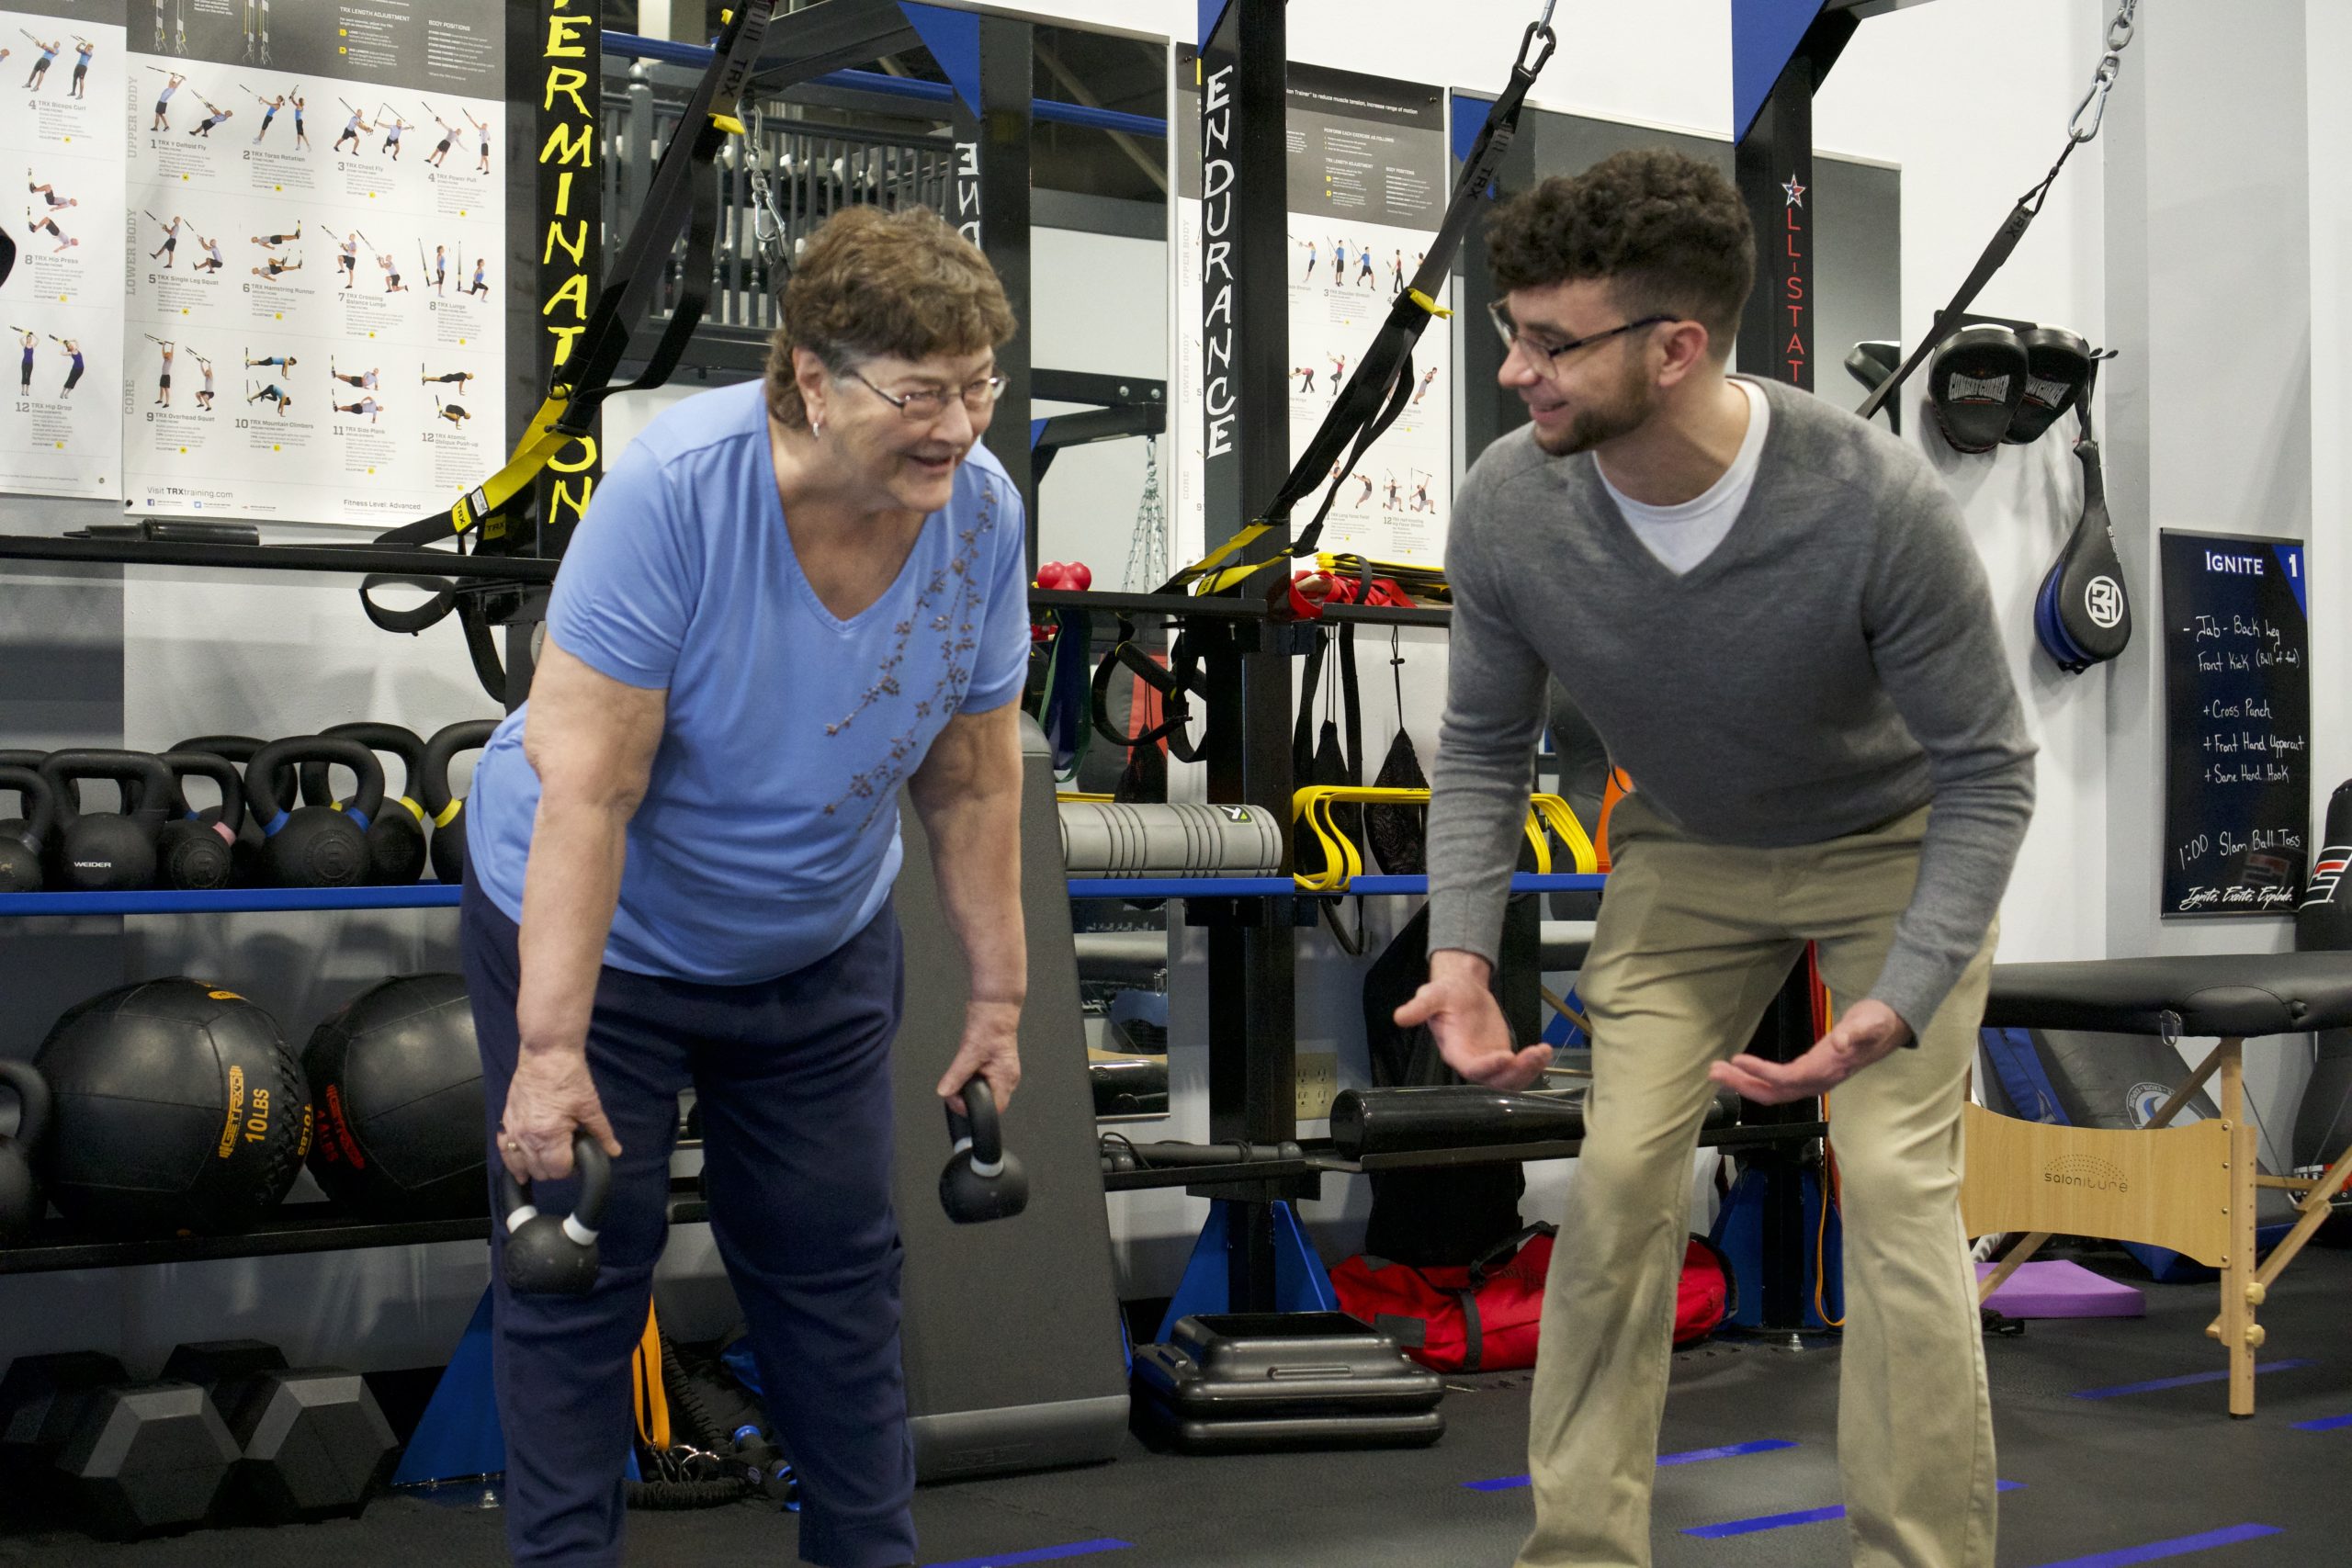 Where Physical Therapy meets Fitness